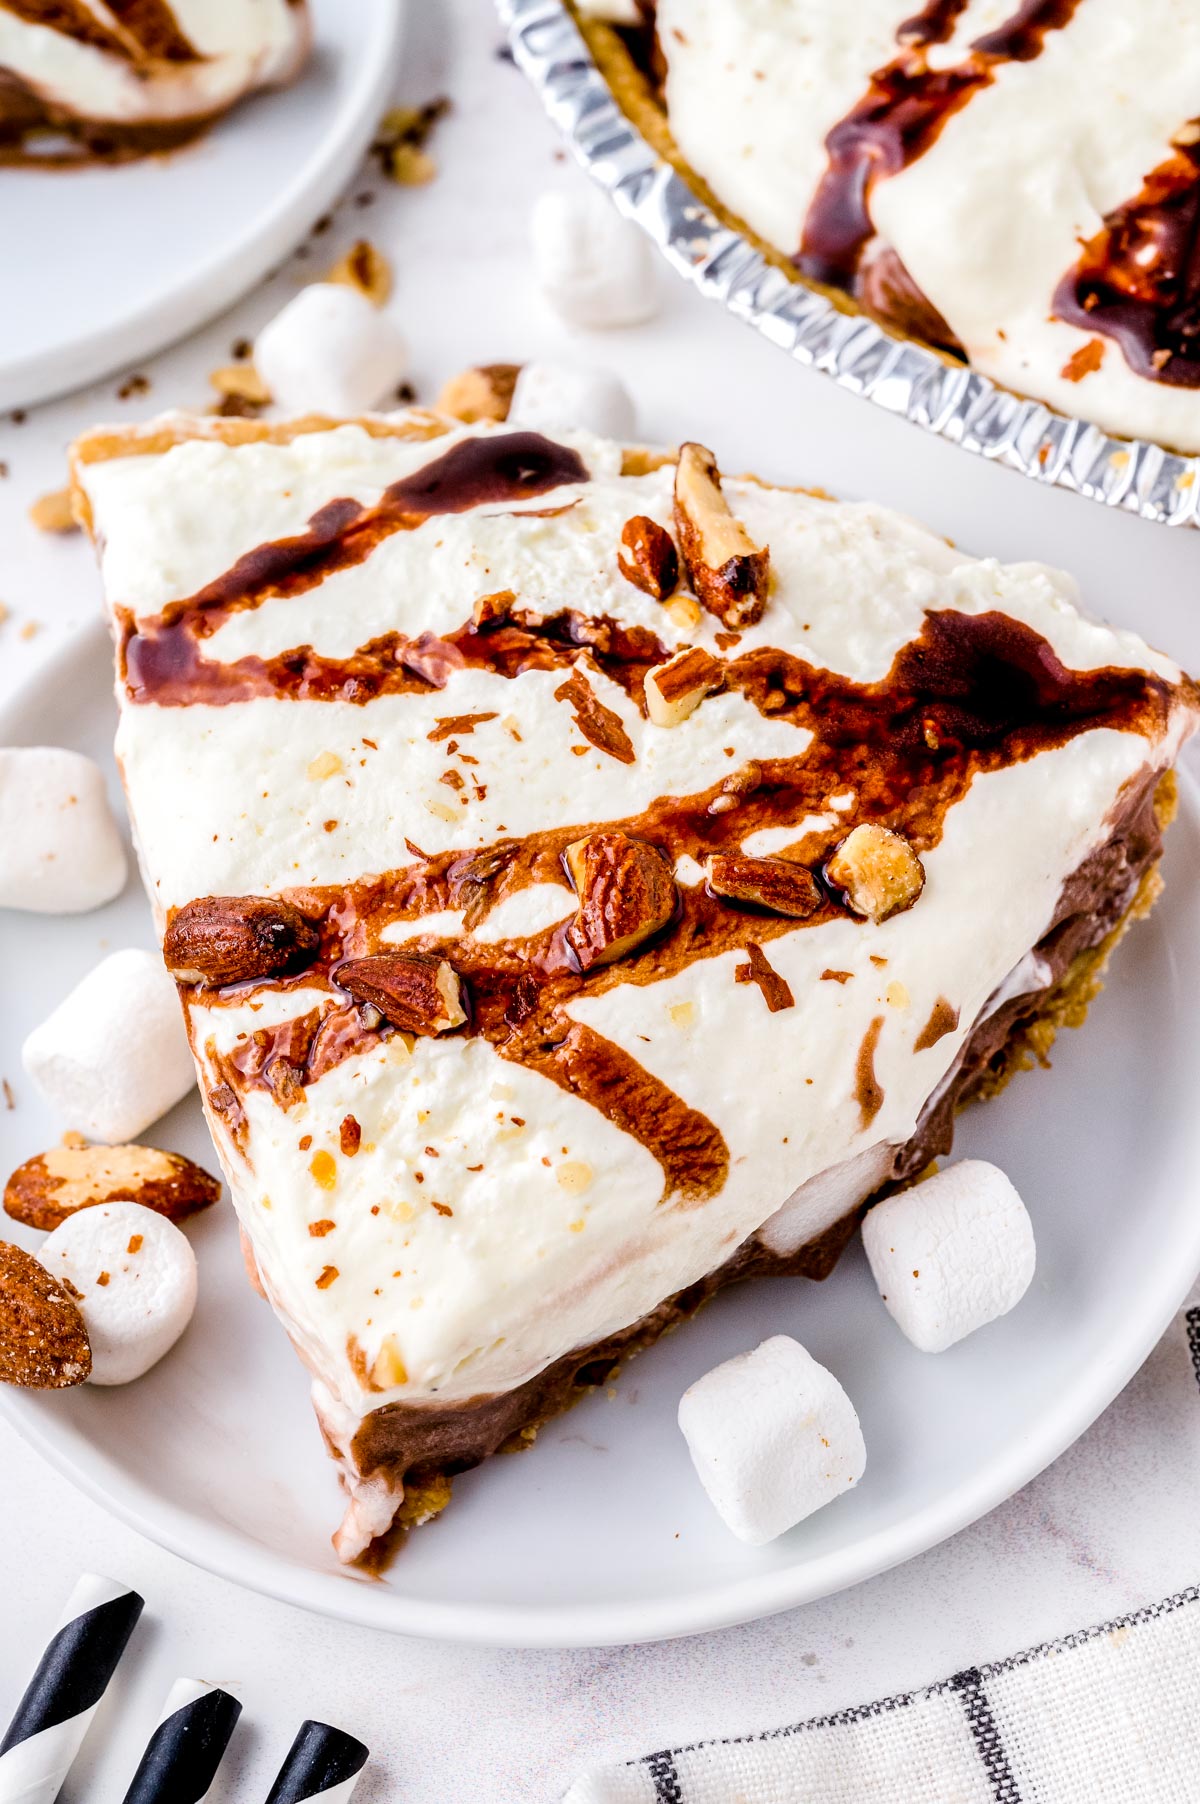 A slice of the finished Rocky Road Pie recipe on a white plate.